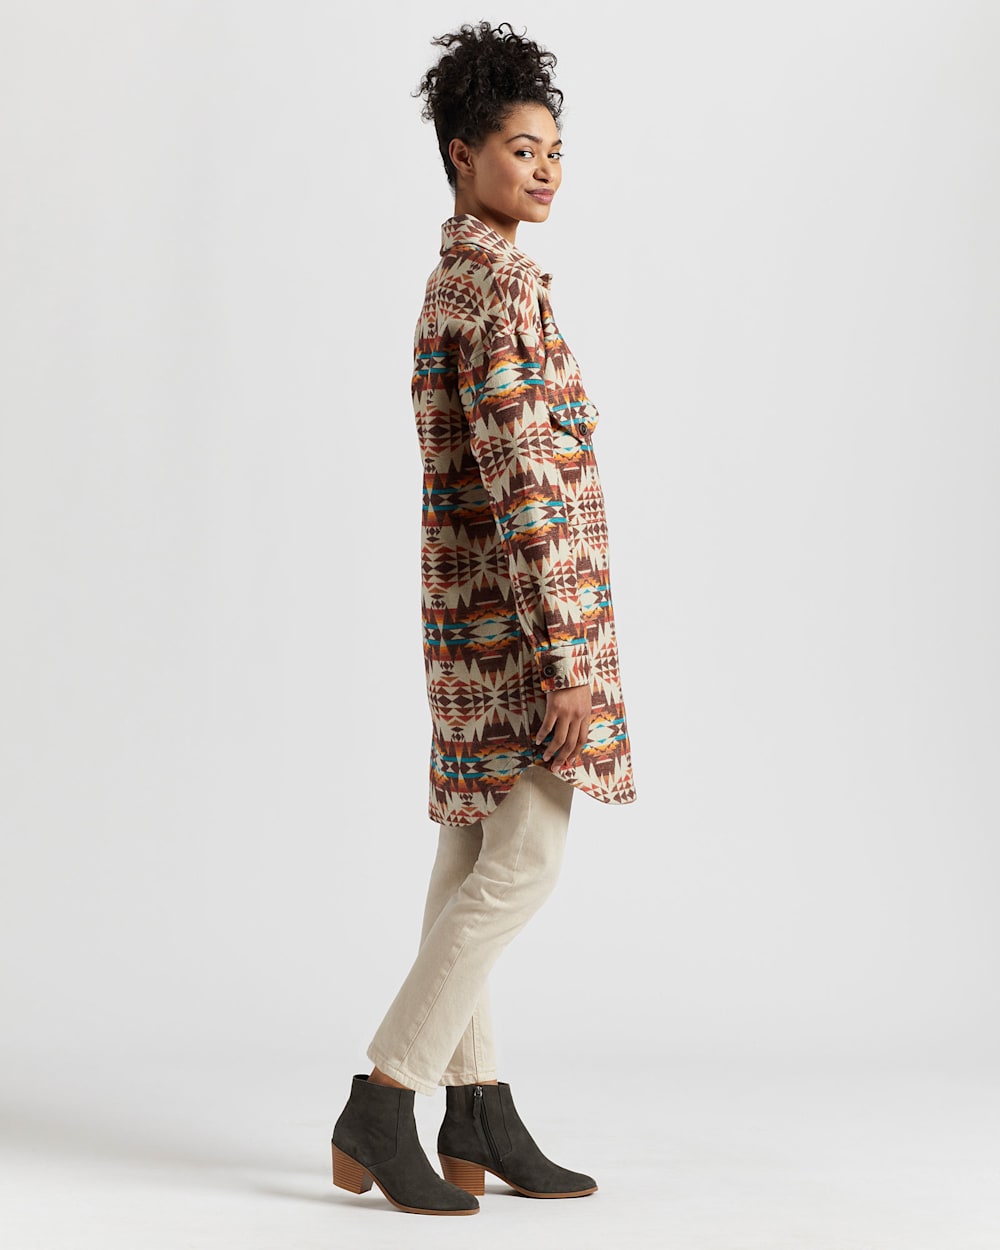 ALTERNATE VIEW OF WOMEN'S OVERSIZED DOUBLESOFT SHIRT JACKET IN WARM SAND MULTI image number 2